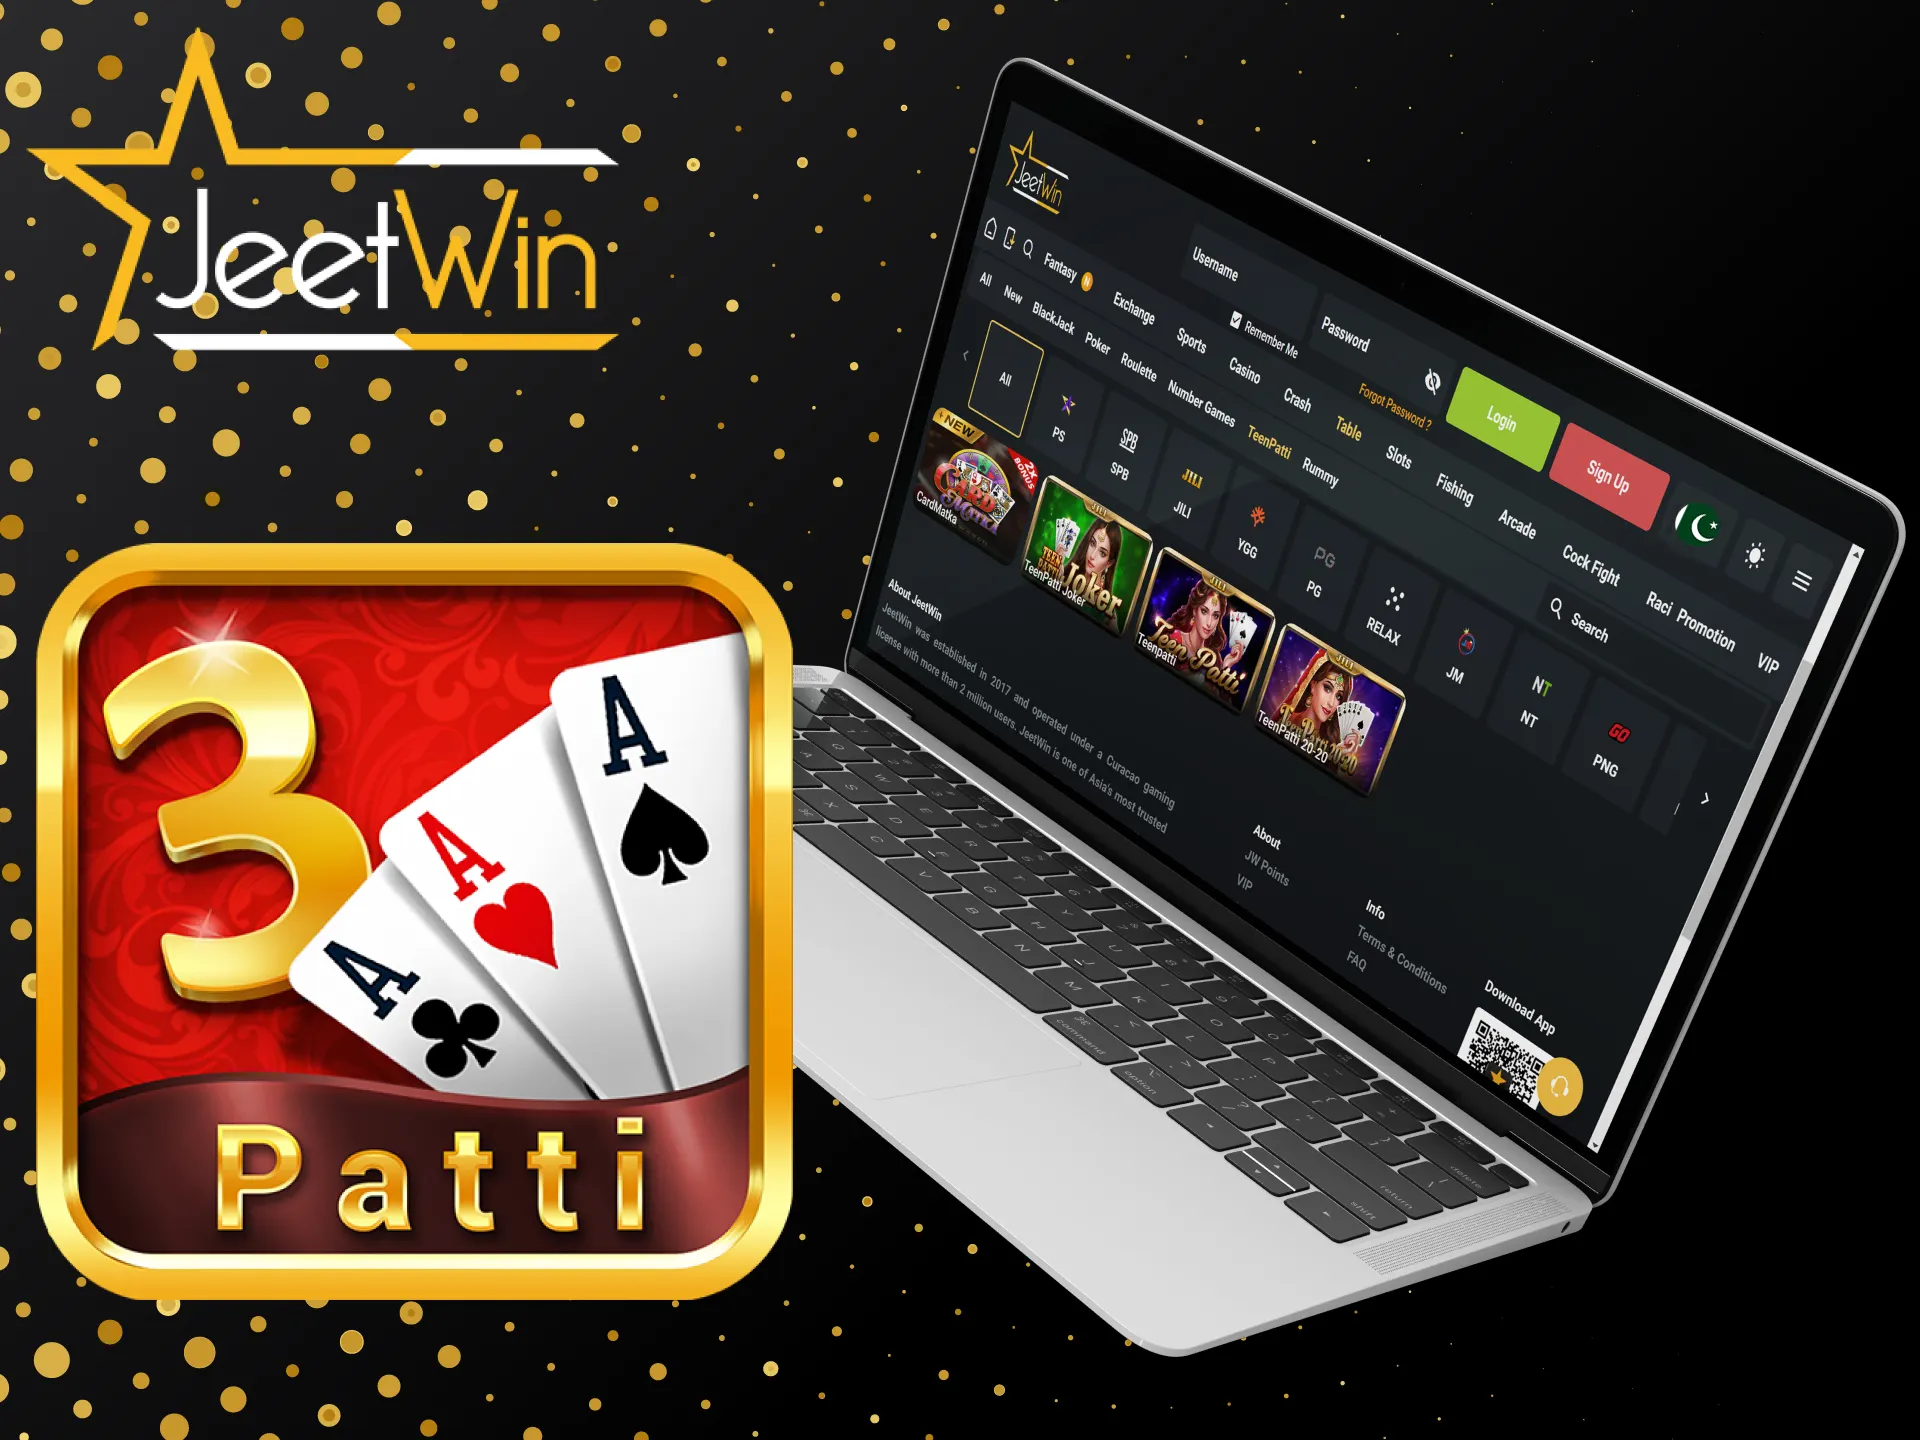 Get JeetWin welcome bonus and compete with other players by playing Teen Patti.